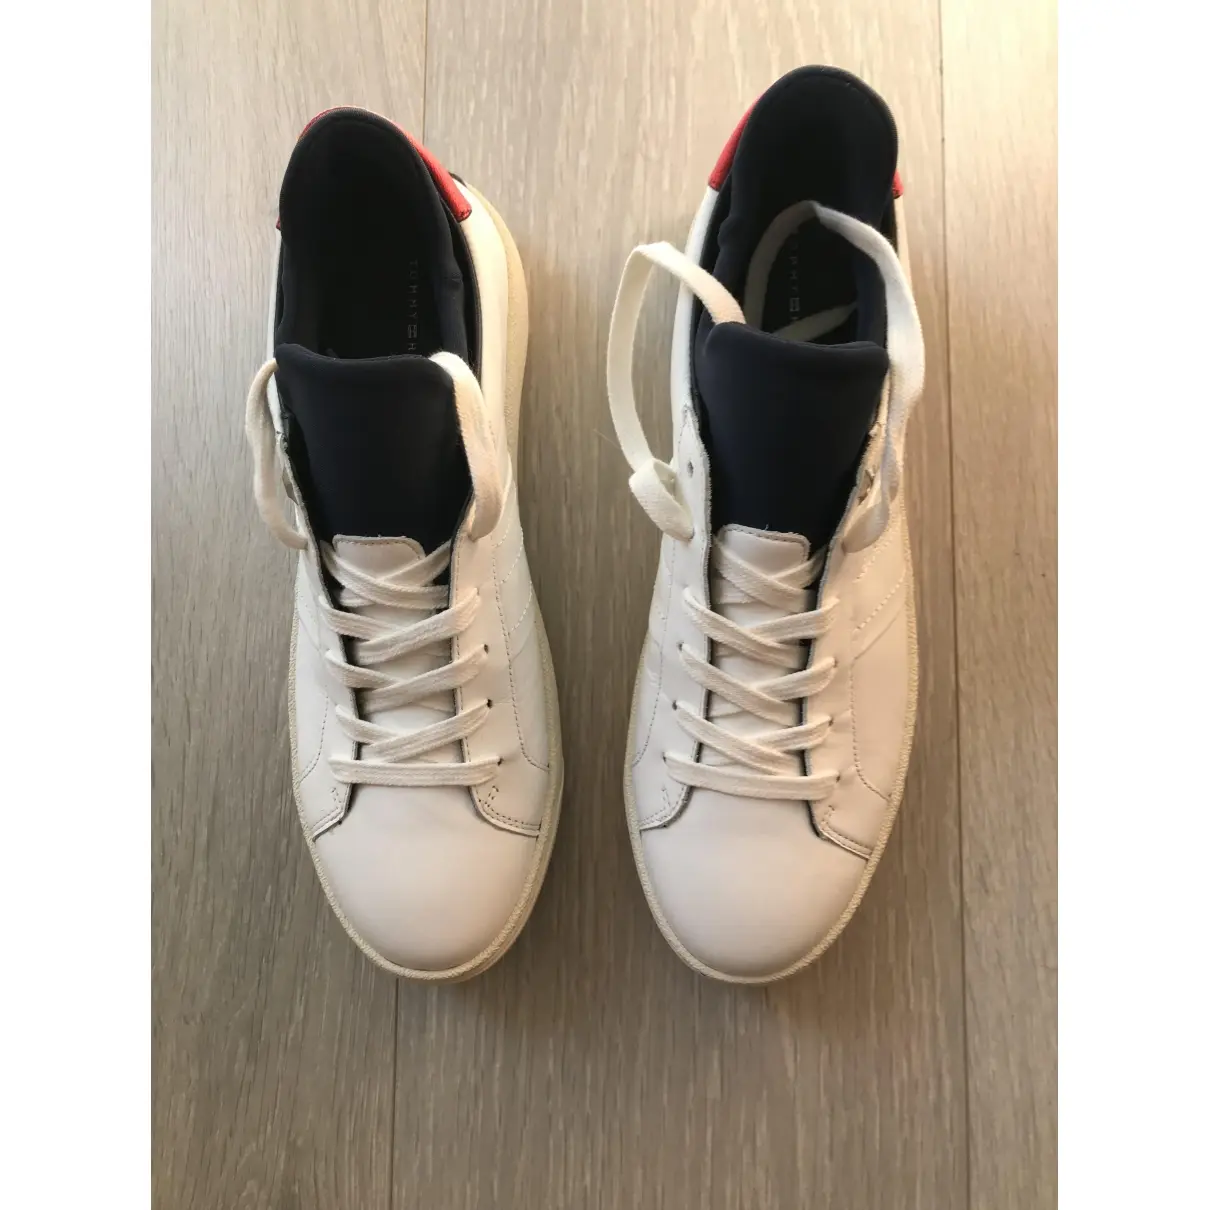 Buy Tommy Hilfiger Leather trainers online